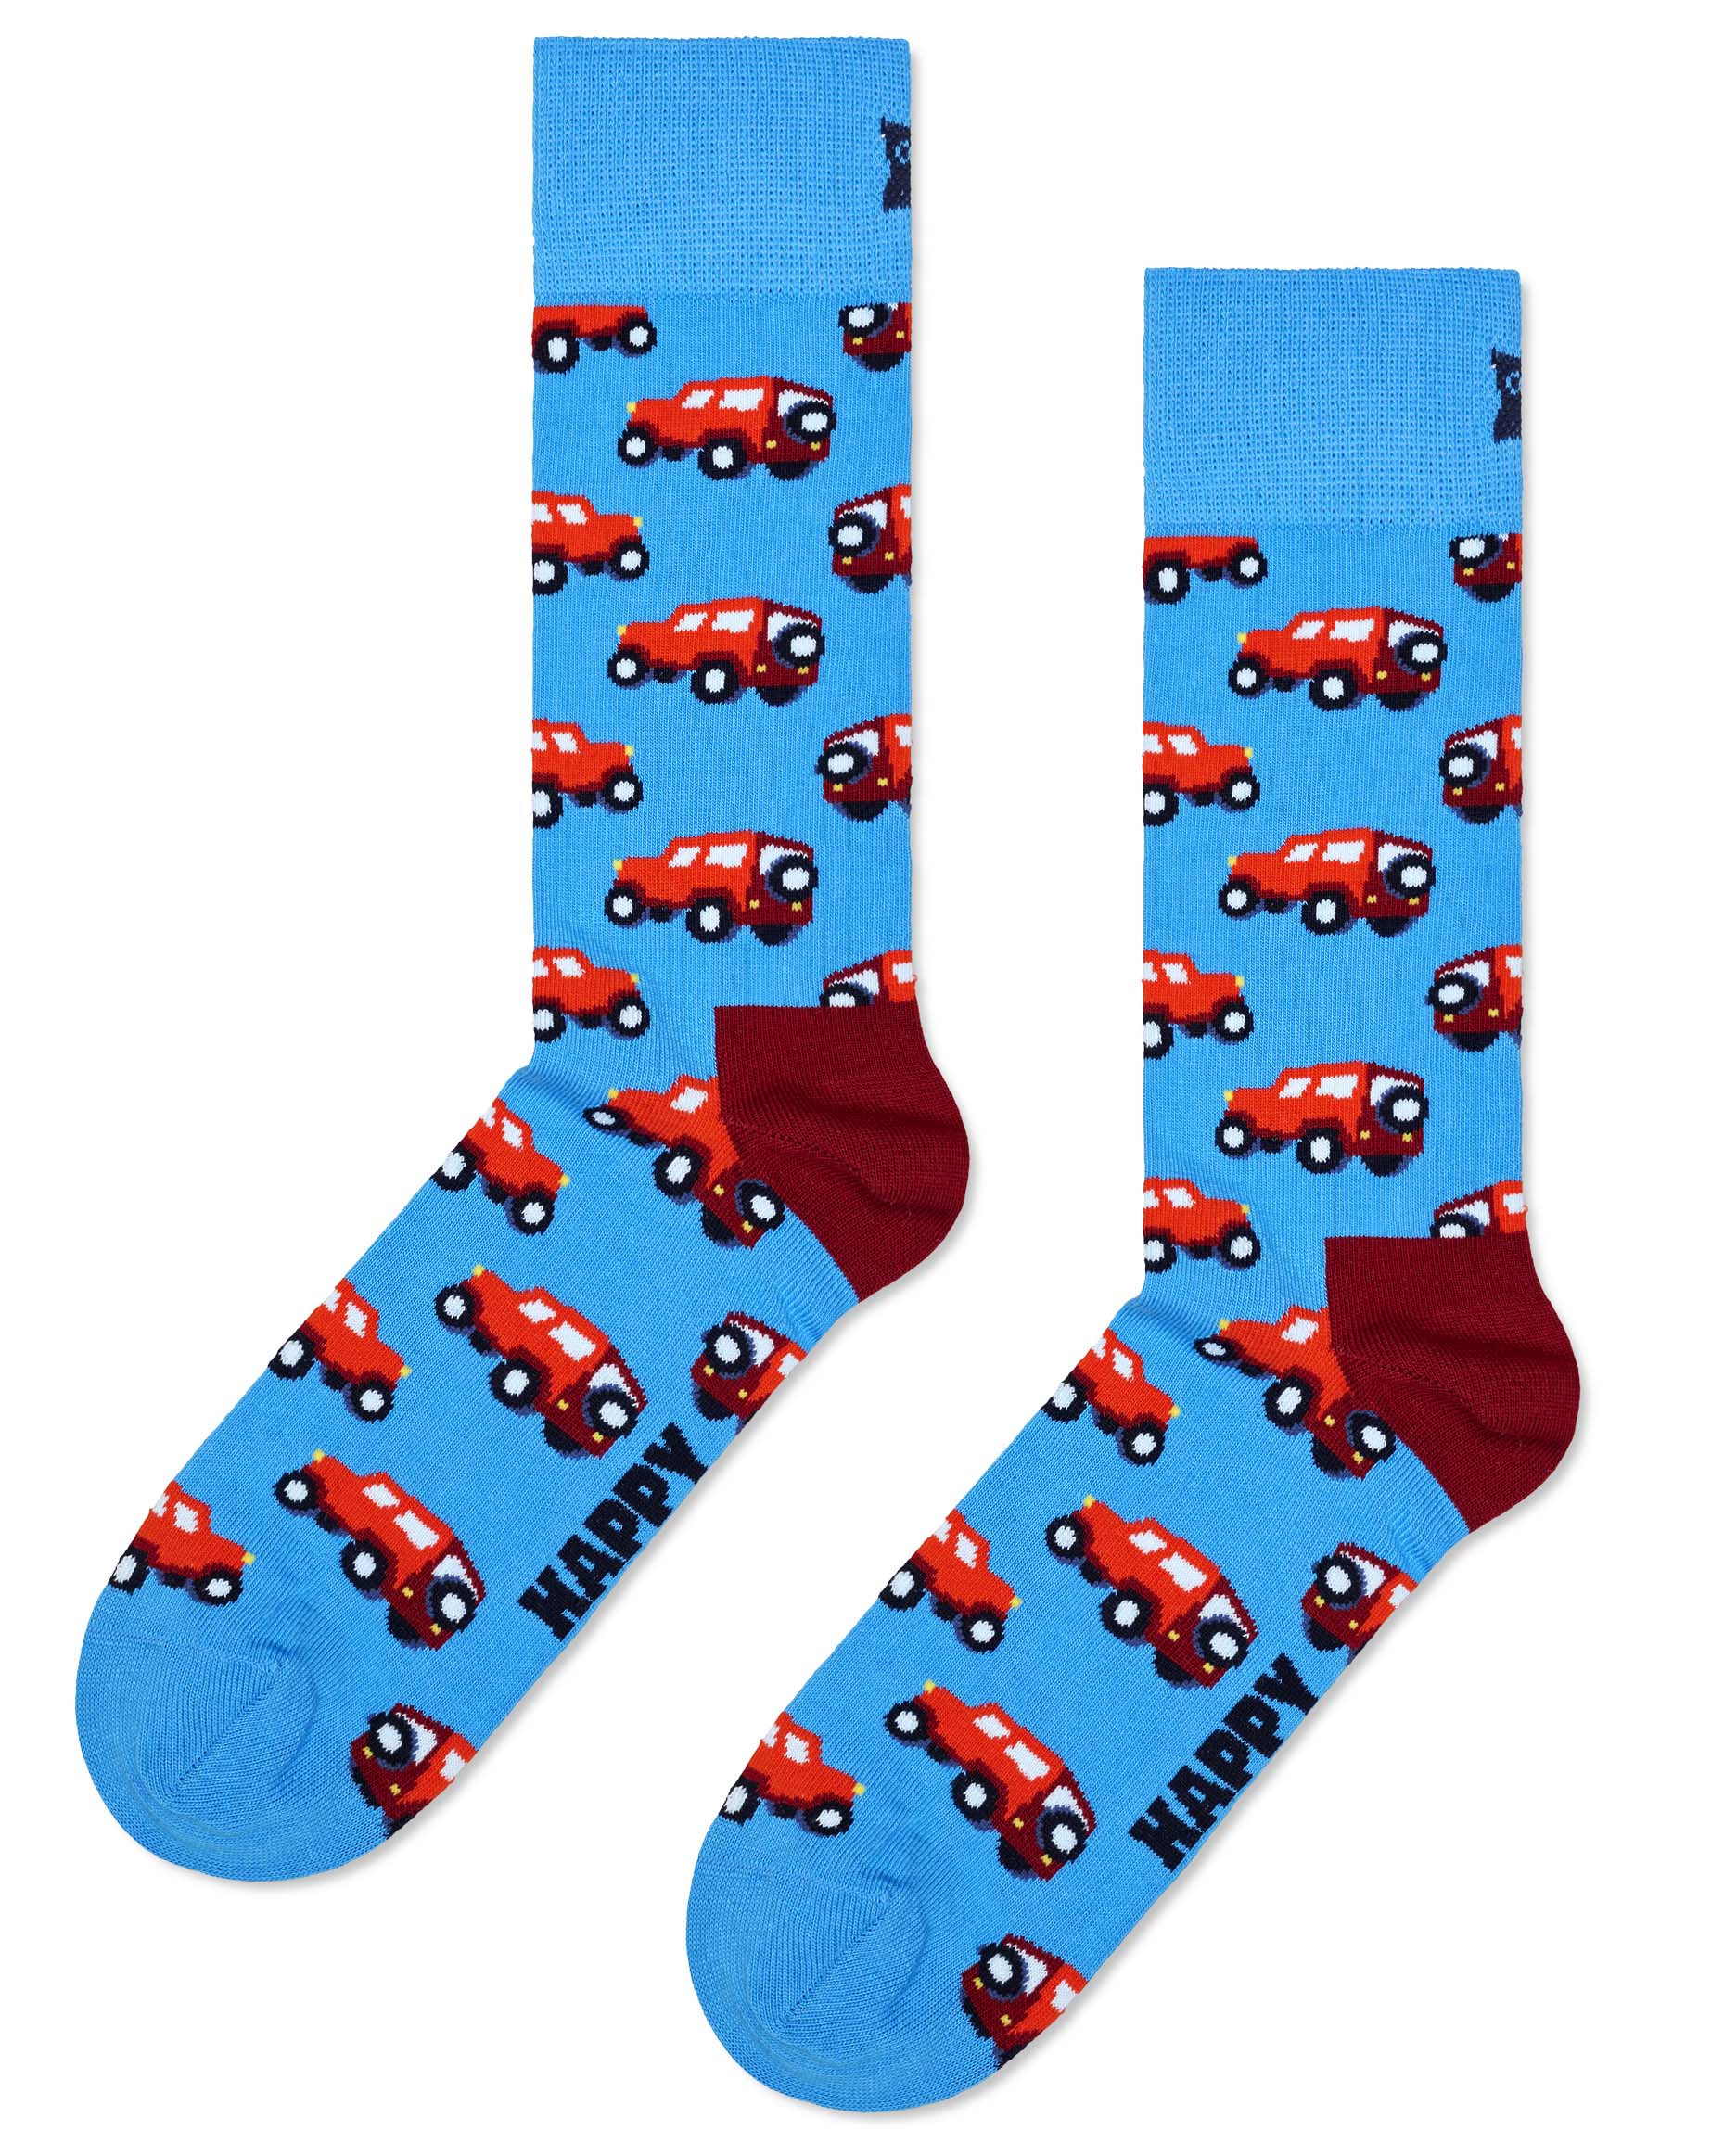 Happy Socks P000045 SUV Sock - Light blue crew cotton socks with an all over SUV type car pattern in shades of red and cream.